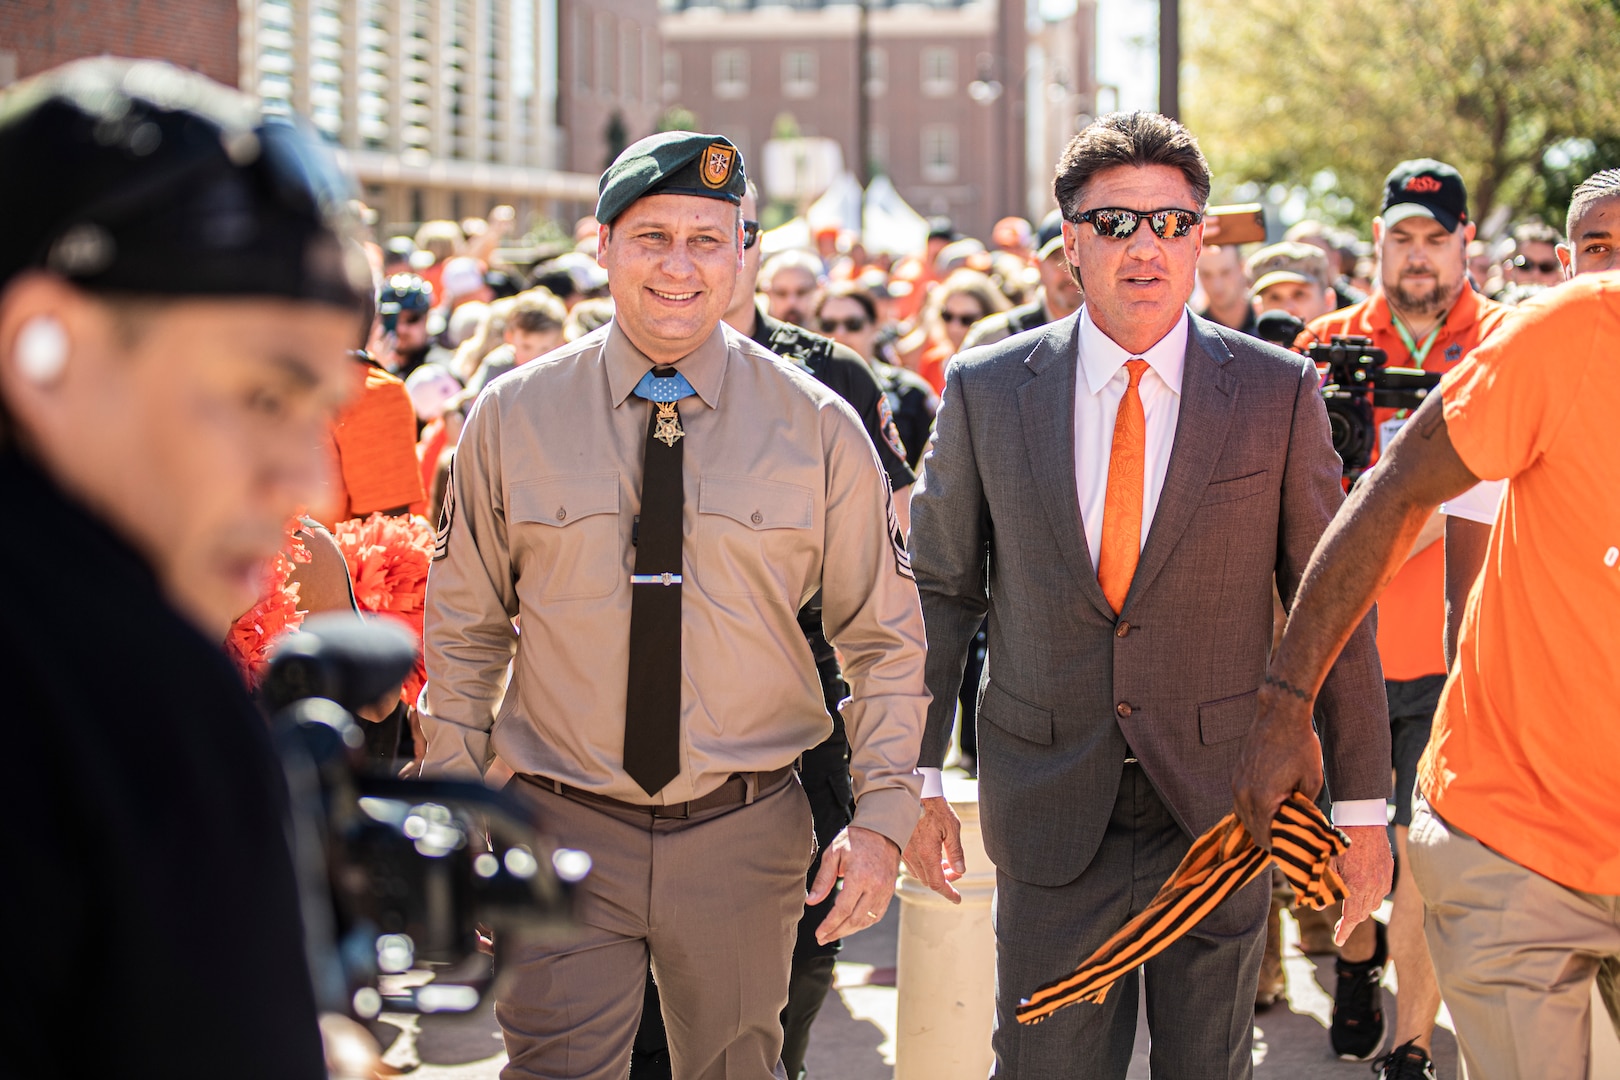 Master Sgt. Earl Plumlee, a Medal of Honor recipient and Oklahoma native, walks with Oklahoma State University head football coach Mike Gundy during The Walk, an Oklahoma State University tradition where members of the football team walk from the Student Union to Boone Pickens Stadium before games, in Stillwater, Oklahoma, Oct. 22, 2022. Plumlee attended the Oklahoma State University homecoming game and walked with head football coach Mike Gundy during The Walk. (Oklahoma National Guard photo by Sgt. Anthony Jones)